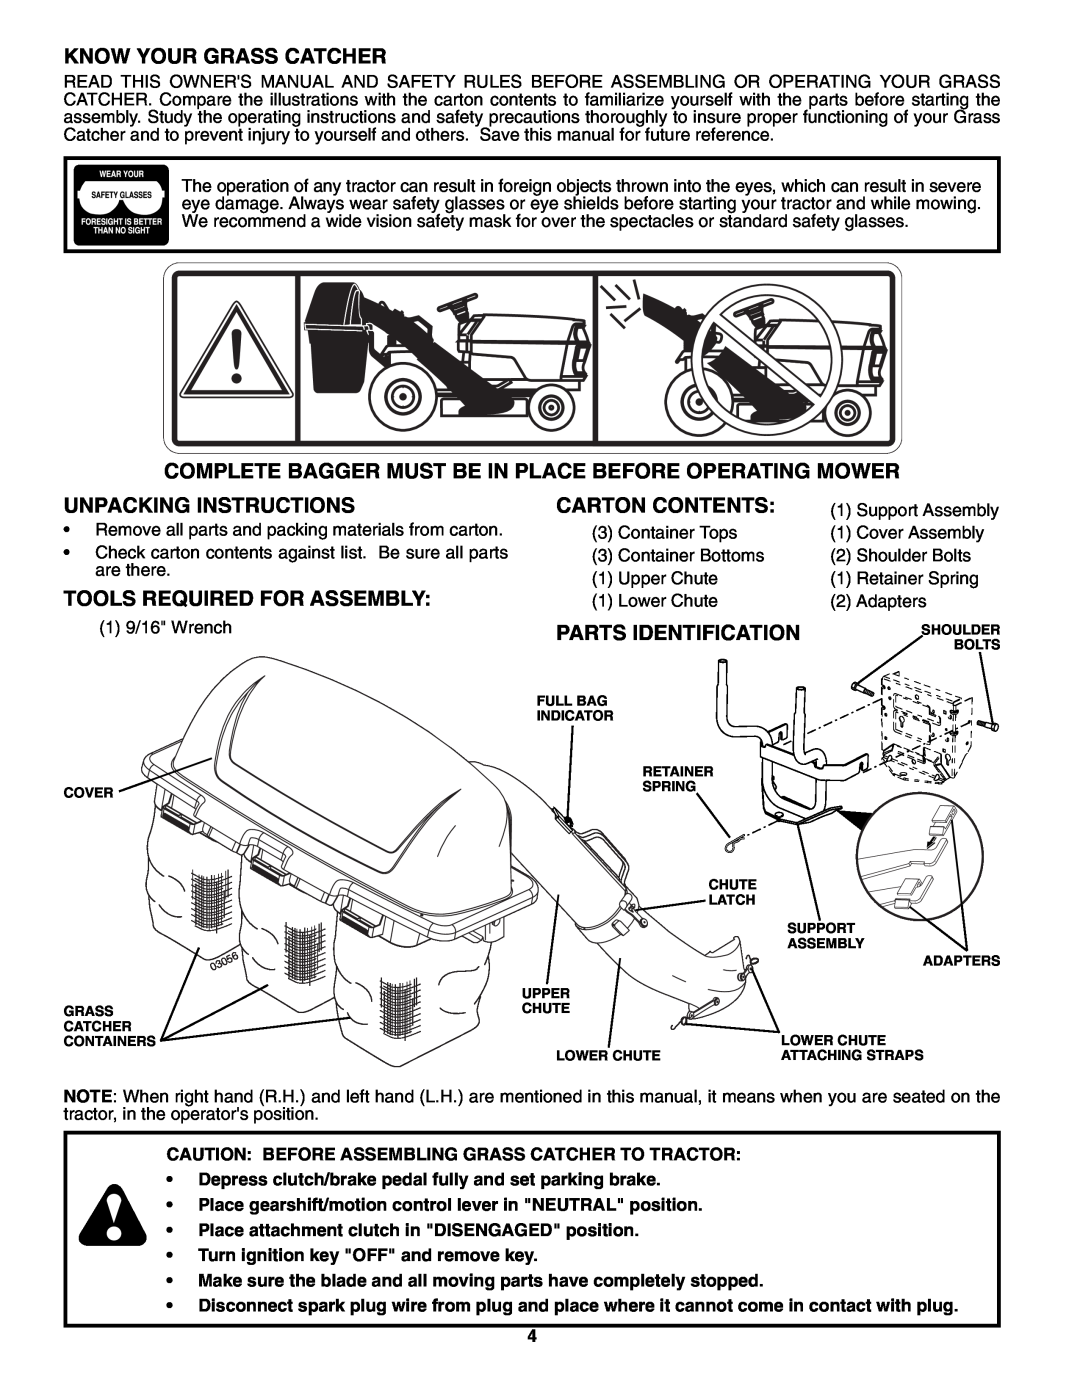 Husqvarna H348SL Know Your Grass Catcher, Complete Bagger Must Be In Place Before Operating Mower, Unpacking Instructions 